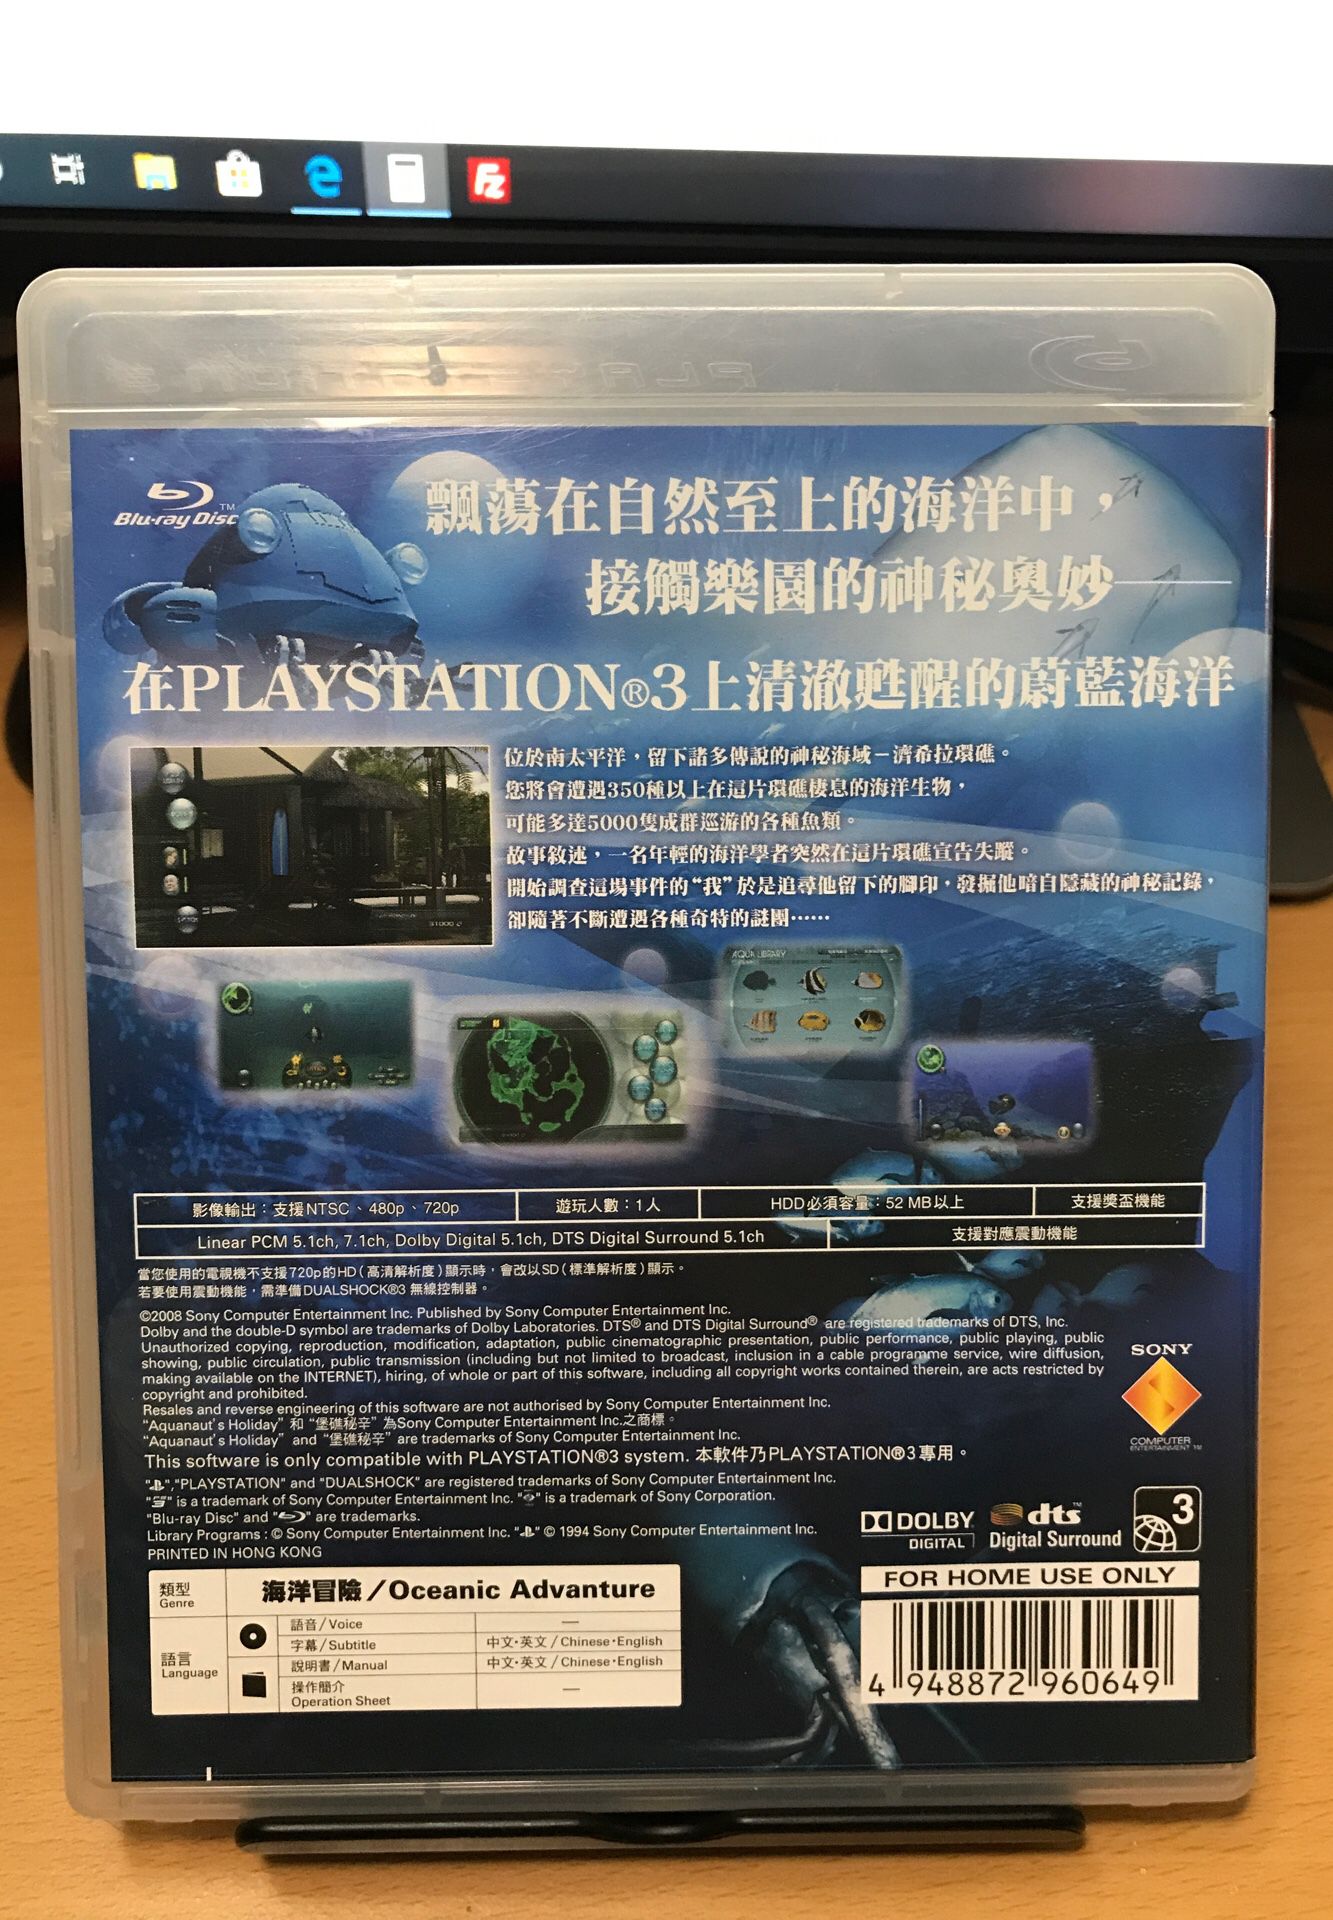 Aquanaut's Holiday for PS3 English + Chinese Super Rare game